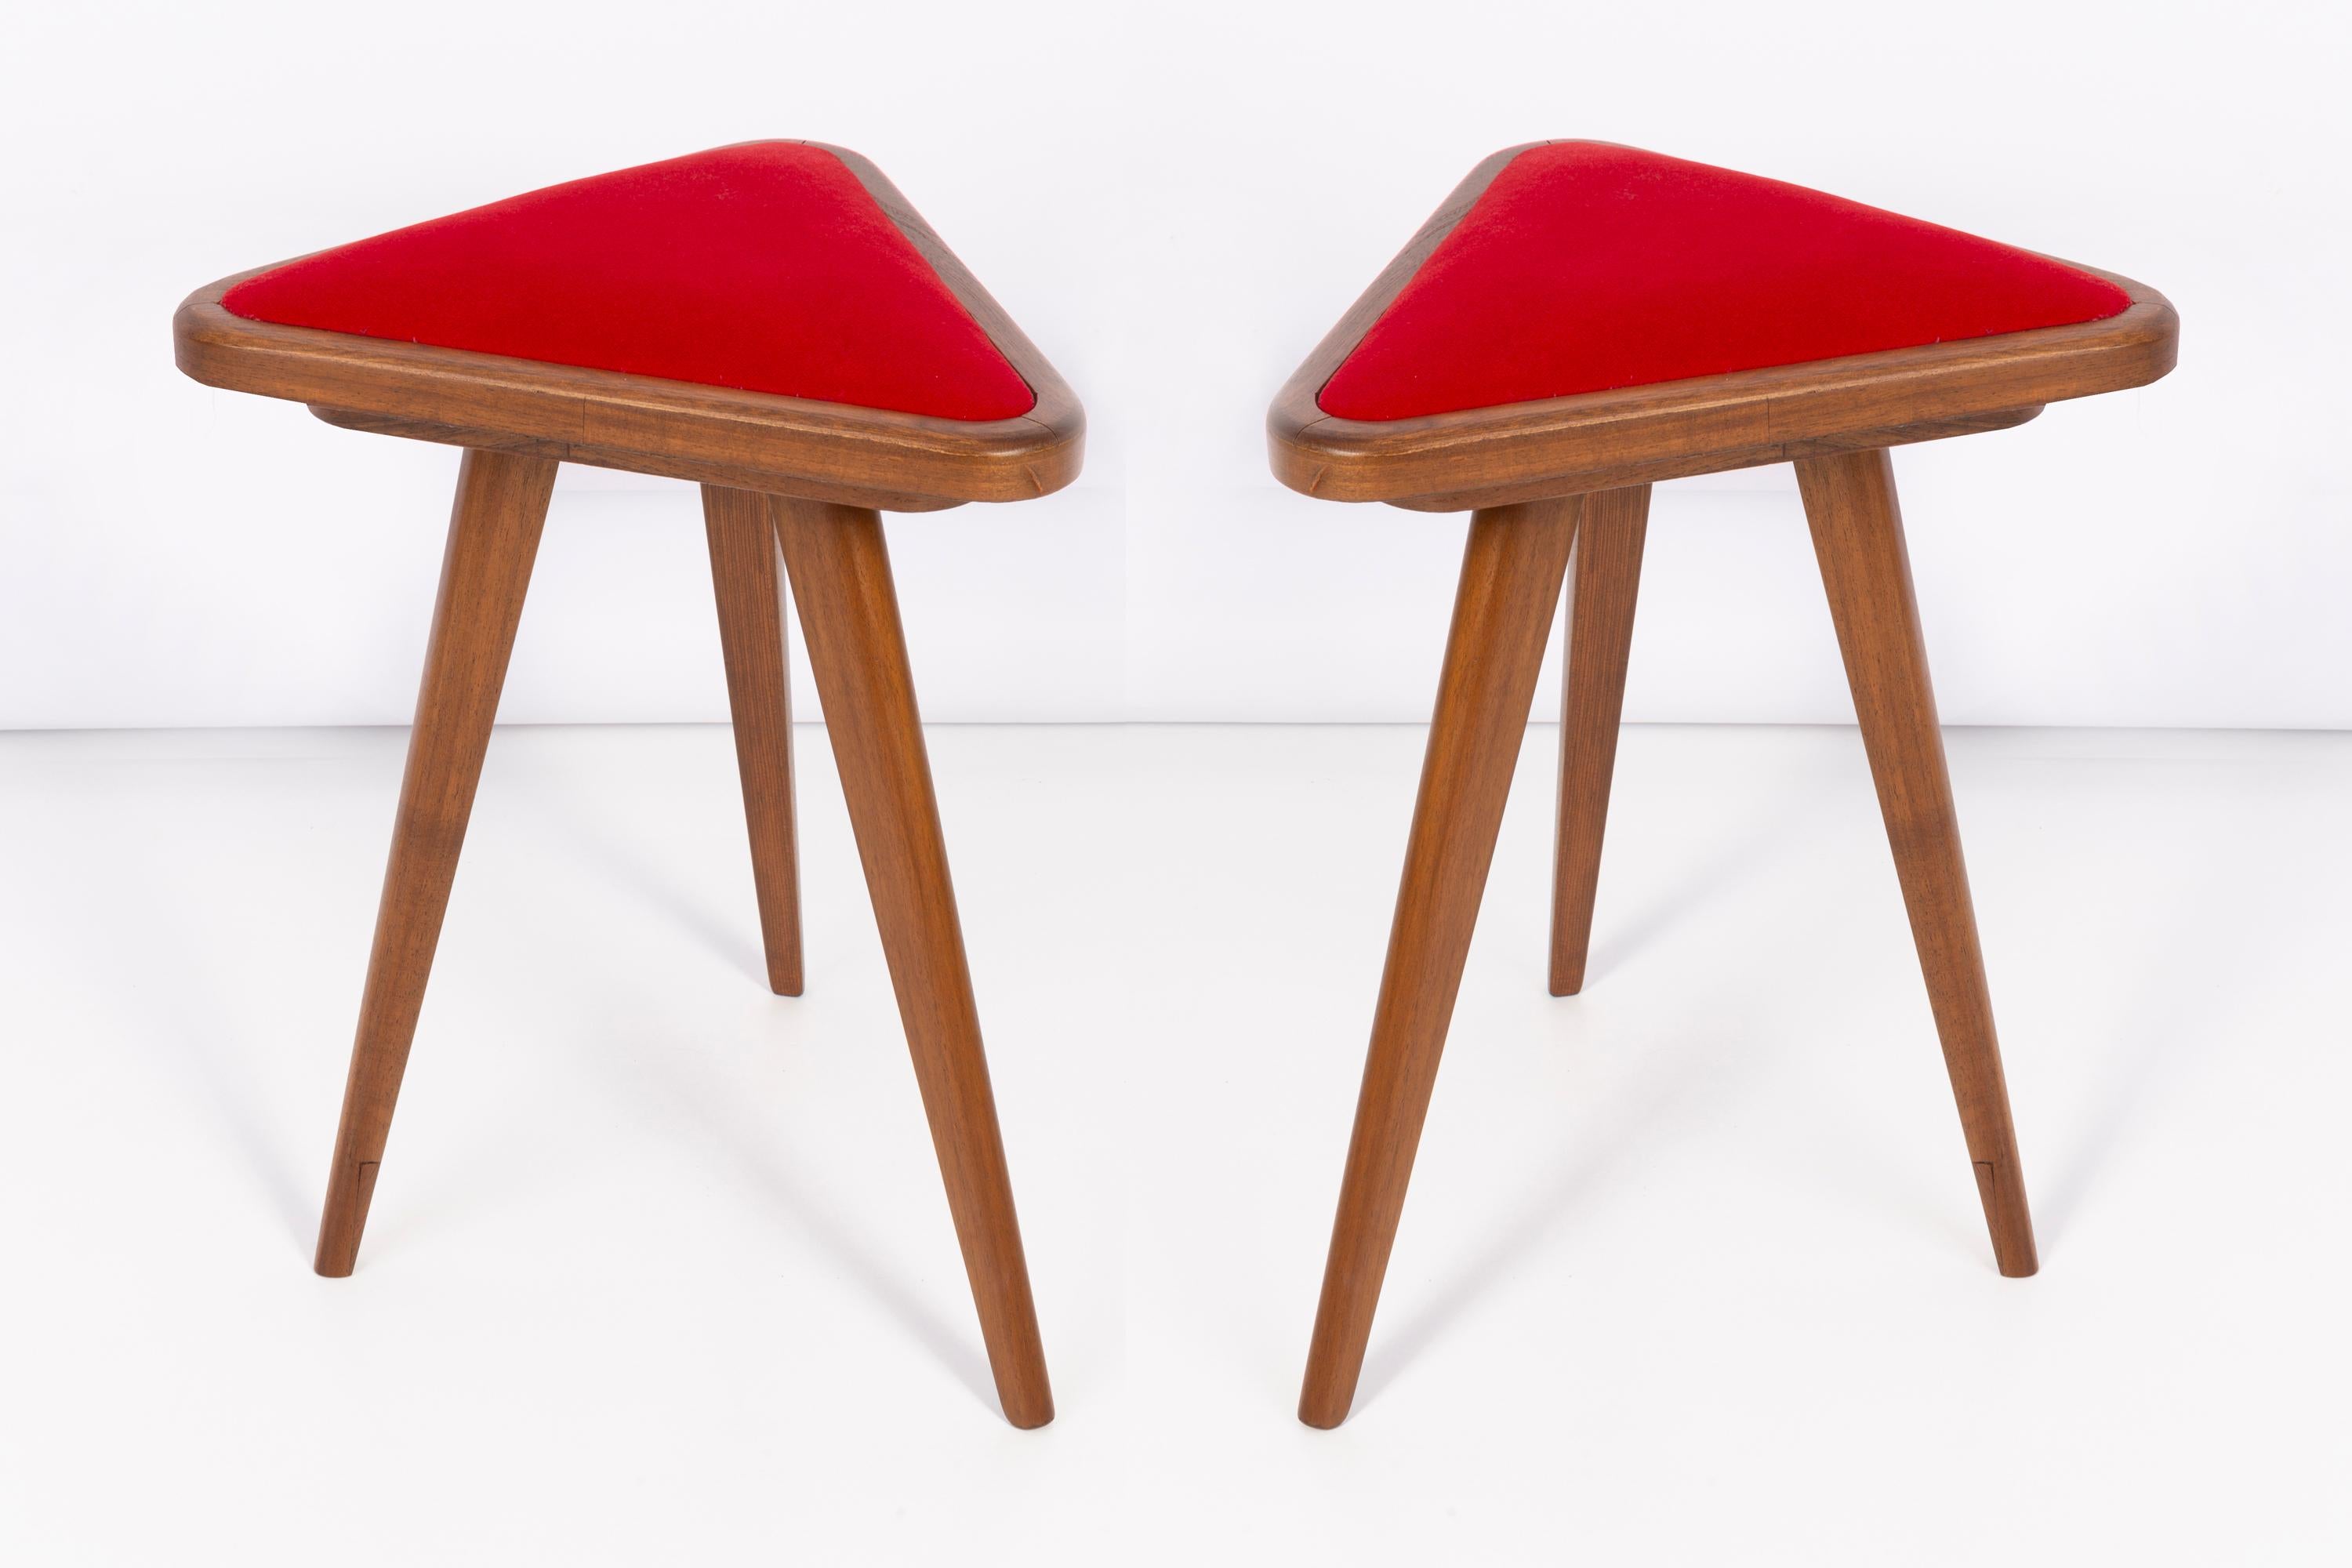 Stools from the turn of the 1960s and 1970s. Beautiful velour upholstery in red color. The stools consists of an upholstered part, a seat and wooden legs narrowing downwards, characteristic of the 1960s style. They are absolutely unique.

Any